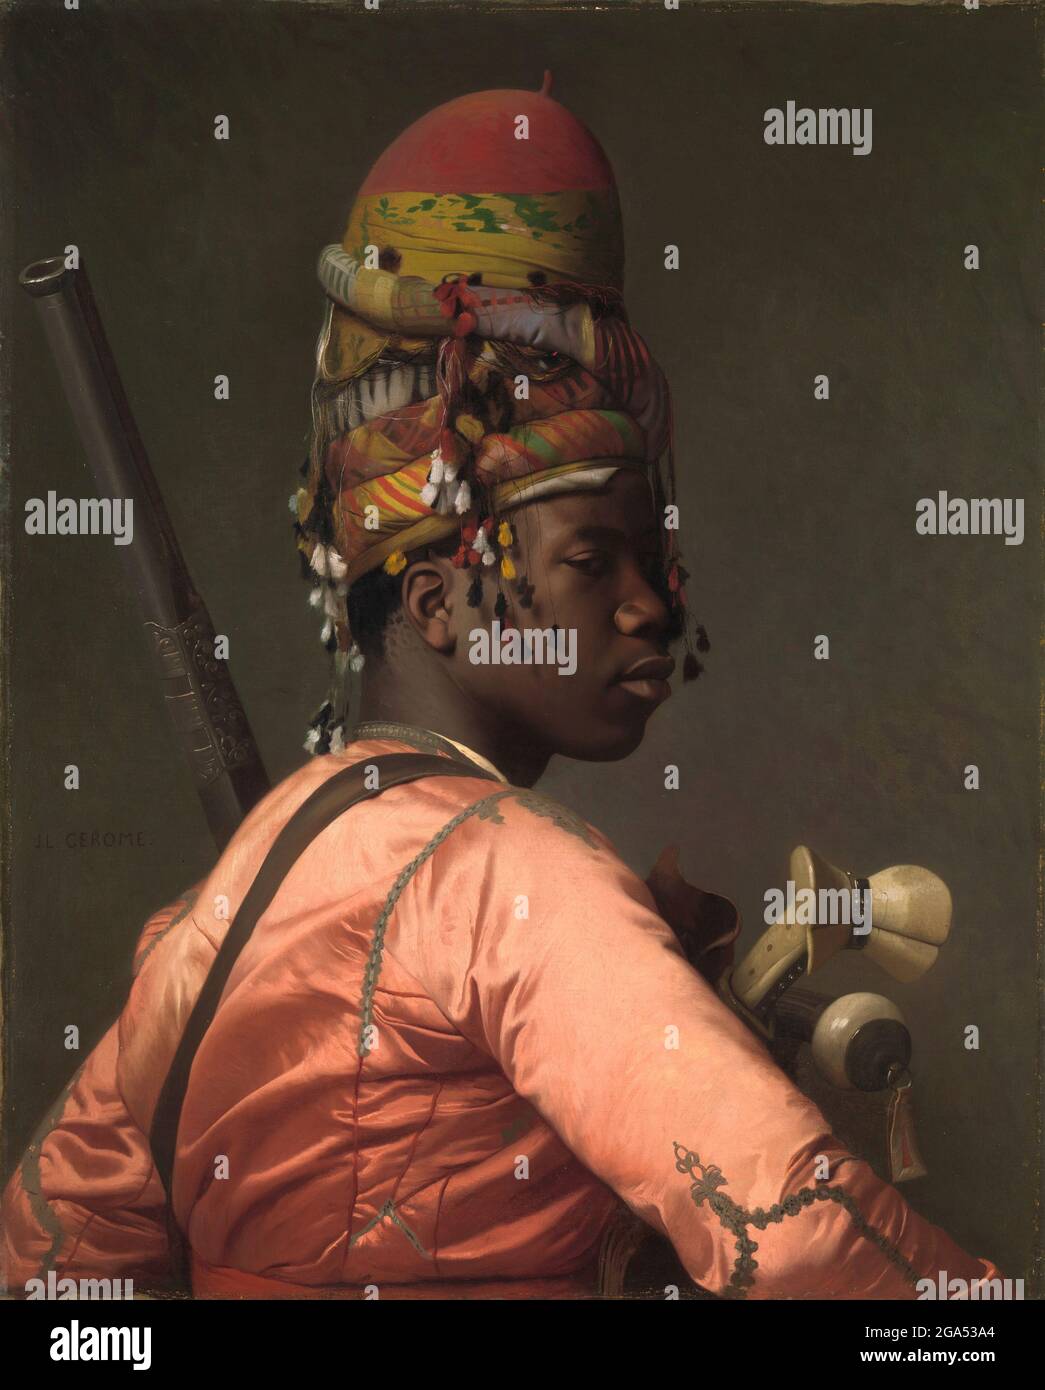 Turkey/France: 'Bashi-Bazouk'. Oil on canvas painting by Jean-Leon Gerome (1825-1904), c. 1868-1869.  A bashi-bazouk or bashibazouk was an irregular soldier of the Ottoman army. They were noted for their lack of discipline.  Jean-Léon Gérôme (11 May 1824 – 10 January 1904) was a French painter and sculptor in the style now known as Academicism. The range of his oeuvre included historical painting, Greek mythology, Orientalism, portraits and other subjects, bringing the Academic painting tradition to an artistic climax. Stock Photo